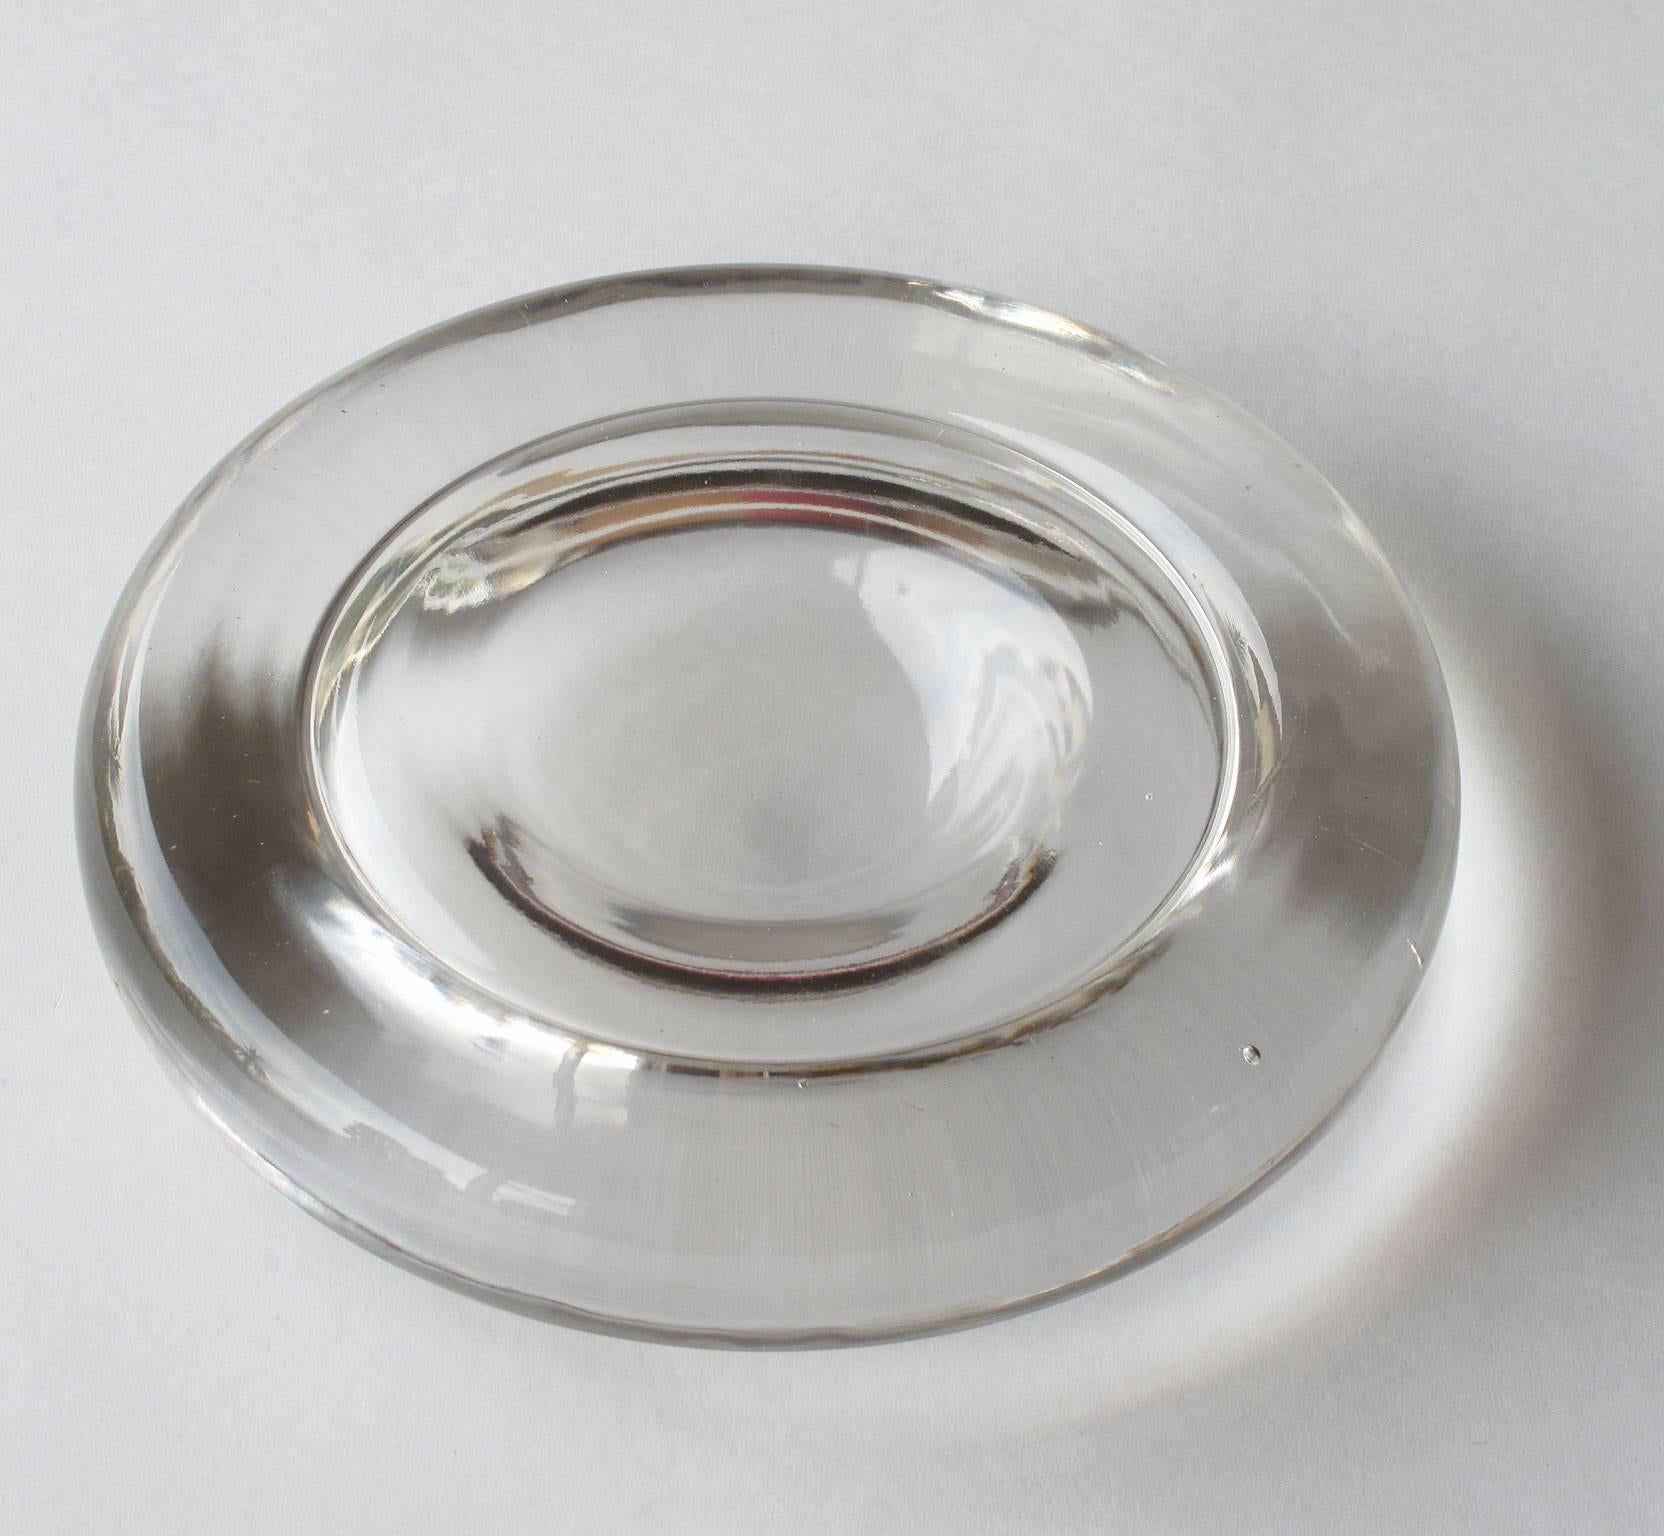 Originally designed as an ashtray, this minimal statement piece made of solid molded glass in a clear finish with a ripple shape references a single drop of water encapsulated in a moment of time. Designed by Enzo Mari and made by Danese Milano,